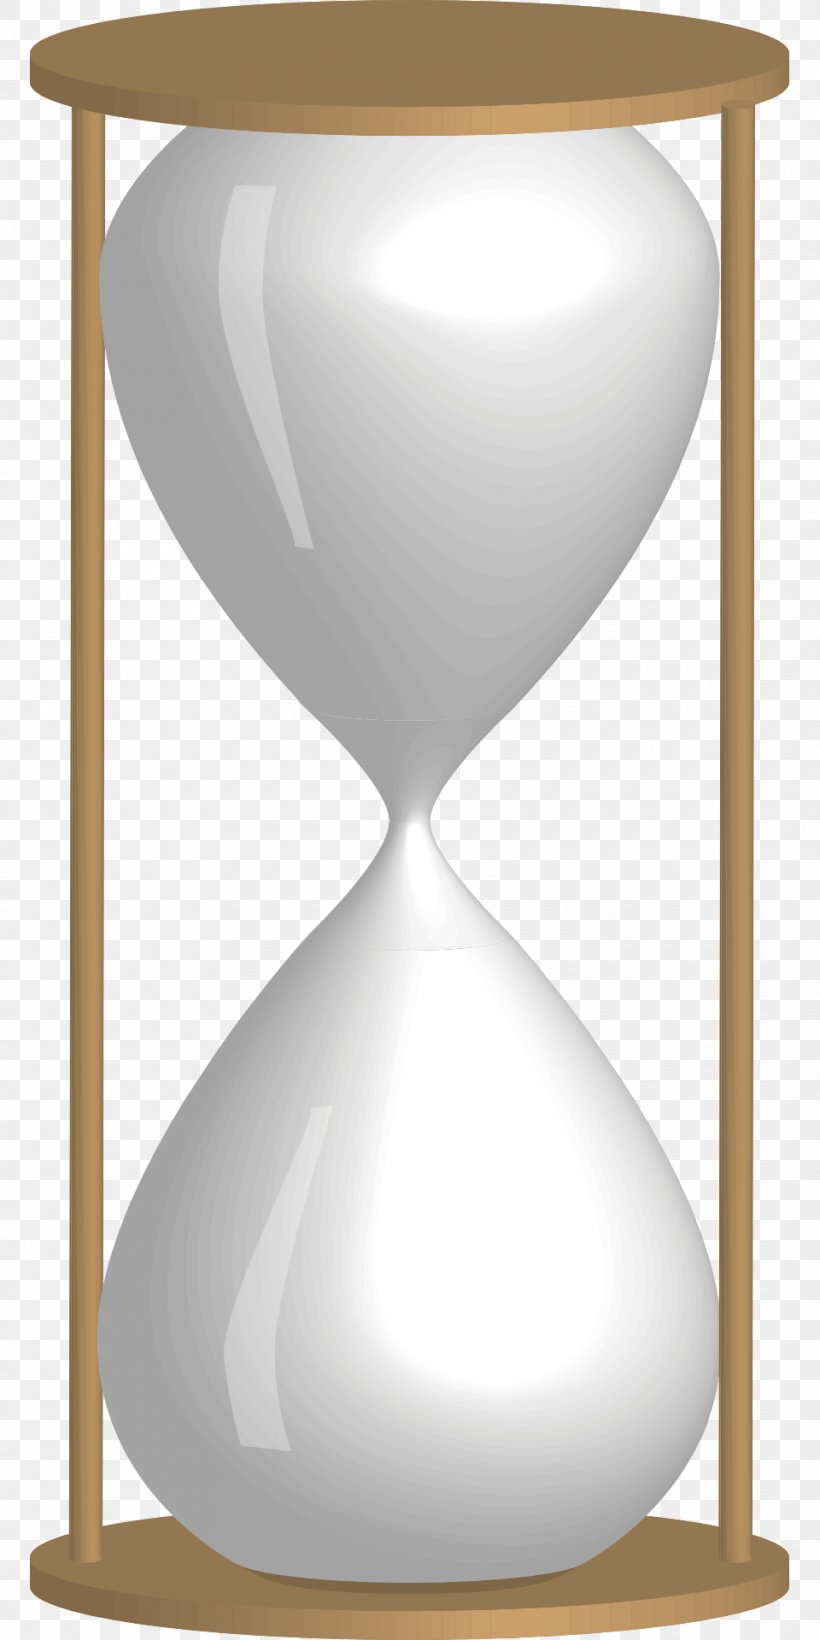 Hourglass Sand Egg Timer Clip Art, PNG, 960x1920px, Hourglass, Clock, Data, Egg Timer, Sand Download Free